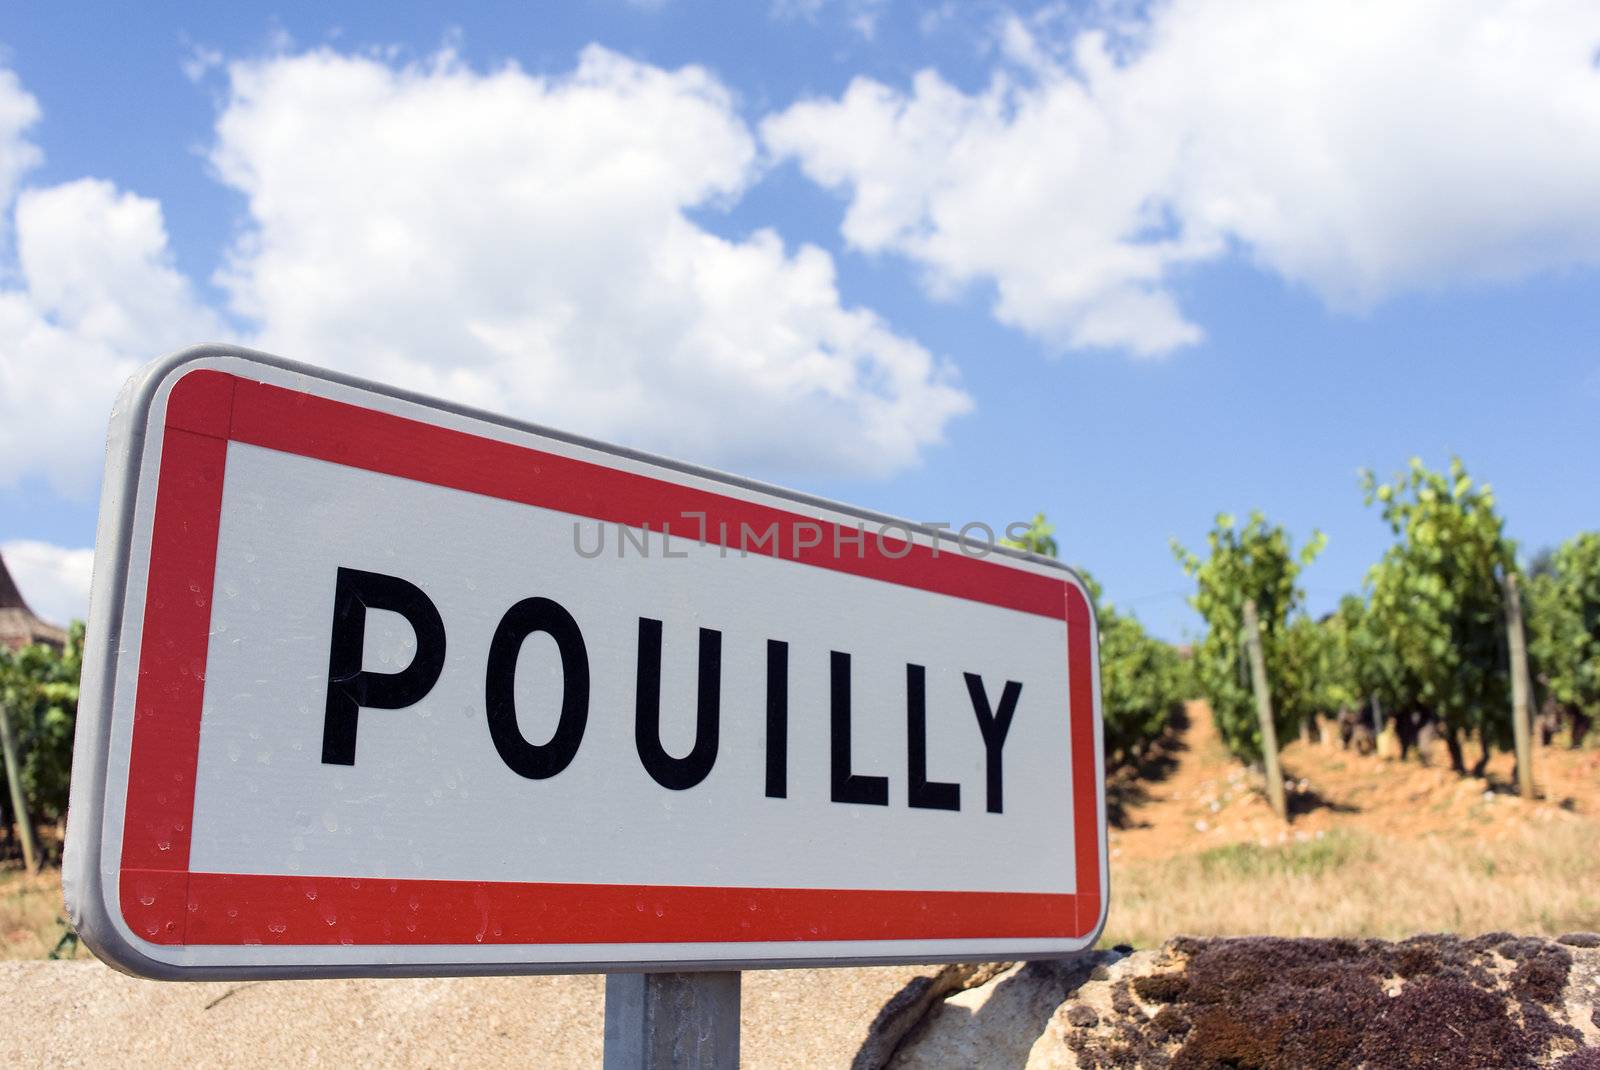 Pouilly, France by vwalakte